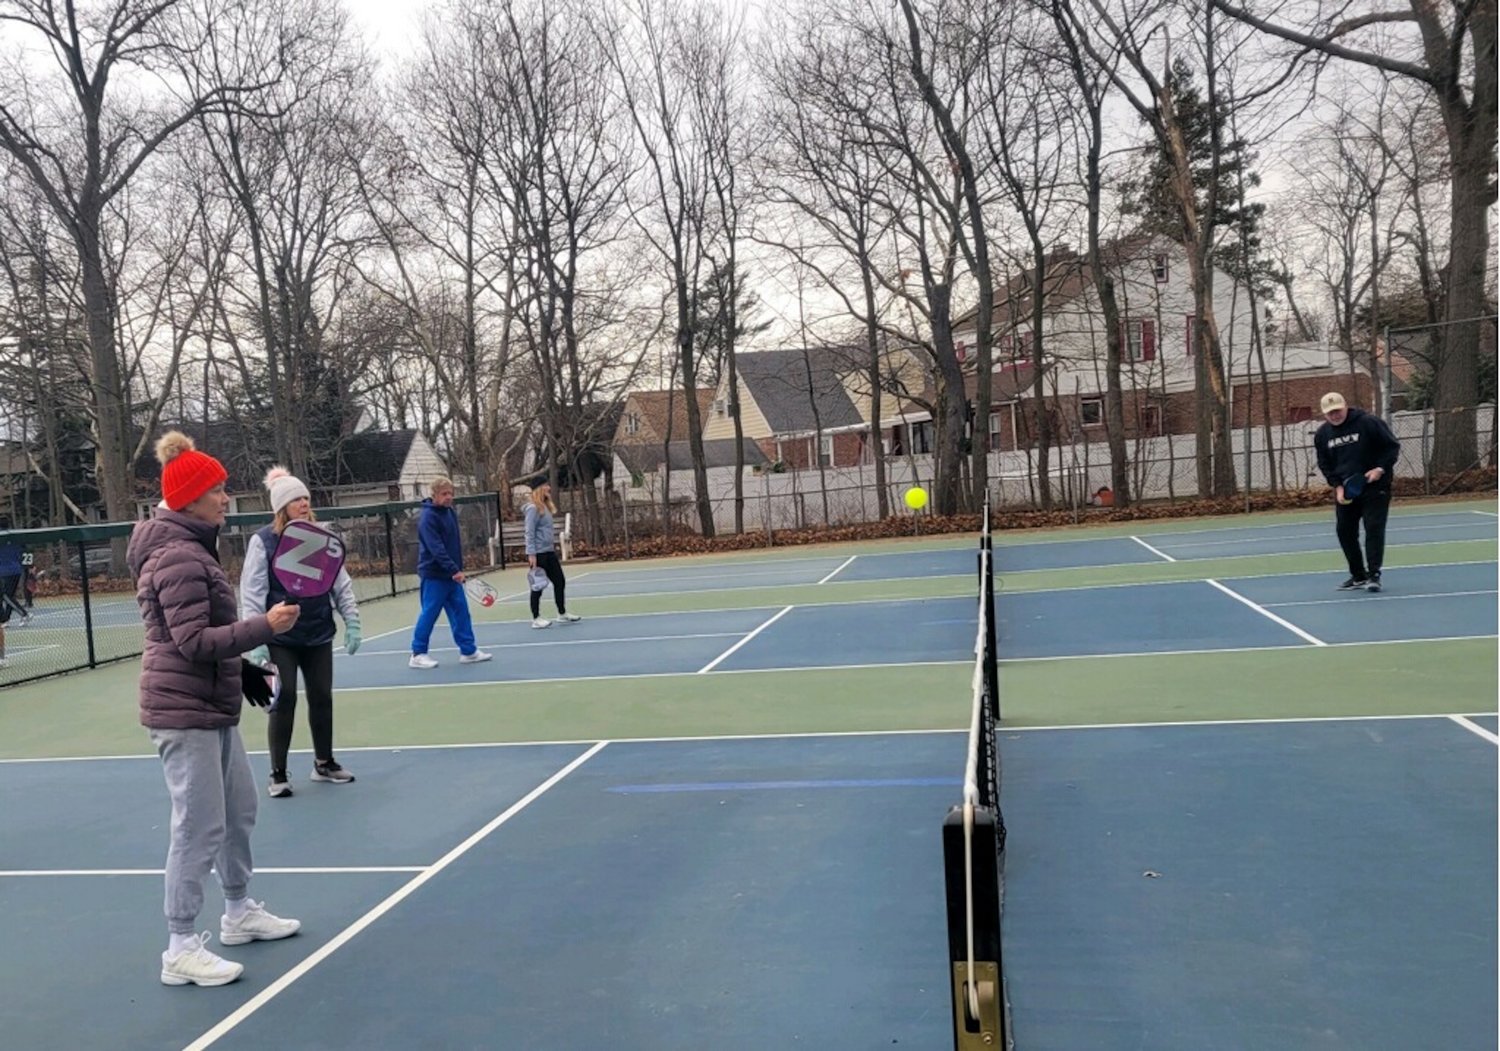 Nearly every day, local seniors play pickleball at Hempstead Lake State Park. Its operations will soon be overtaken by Sportime in Lynbrook.